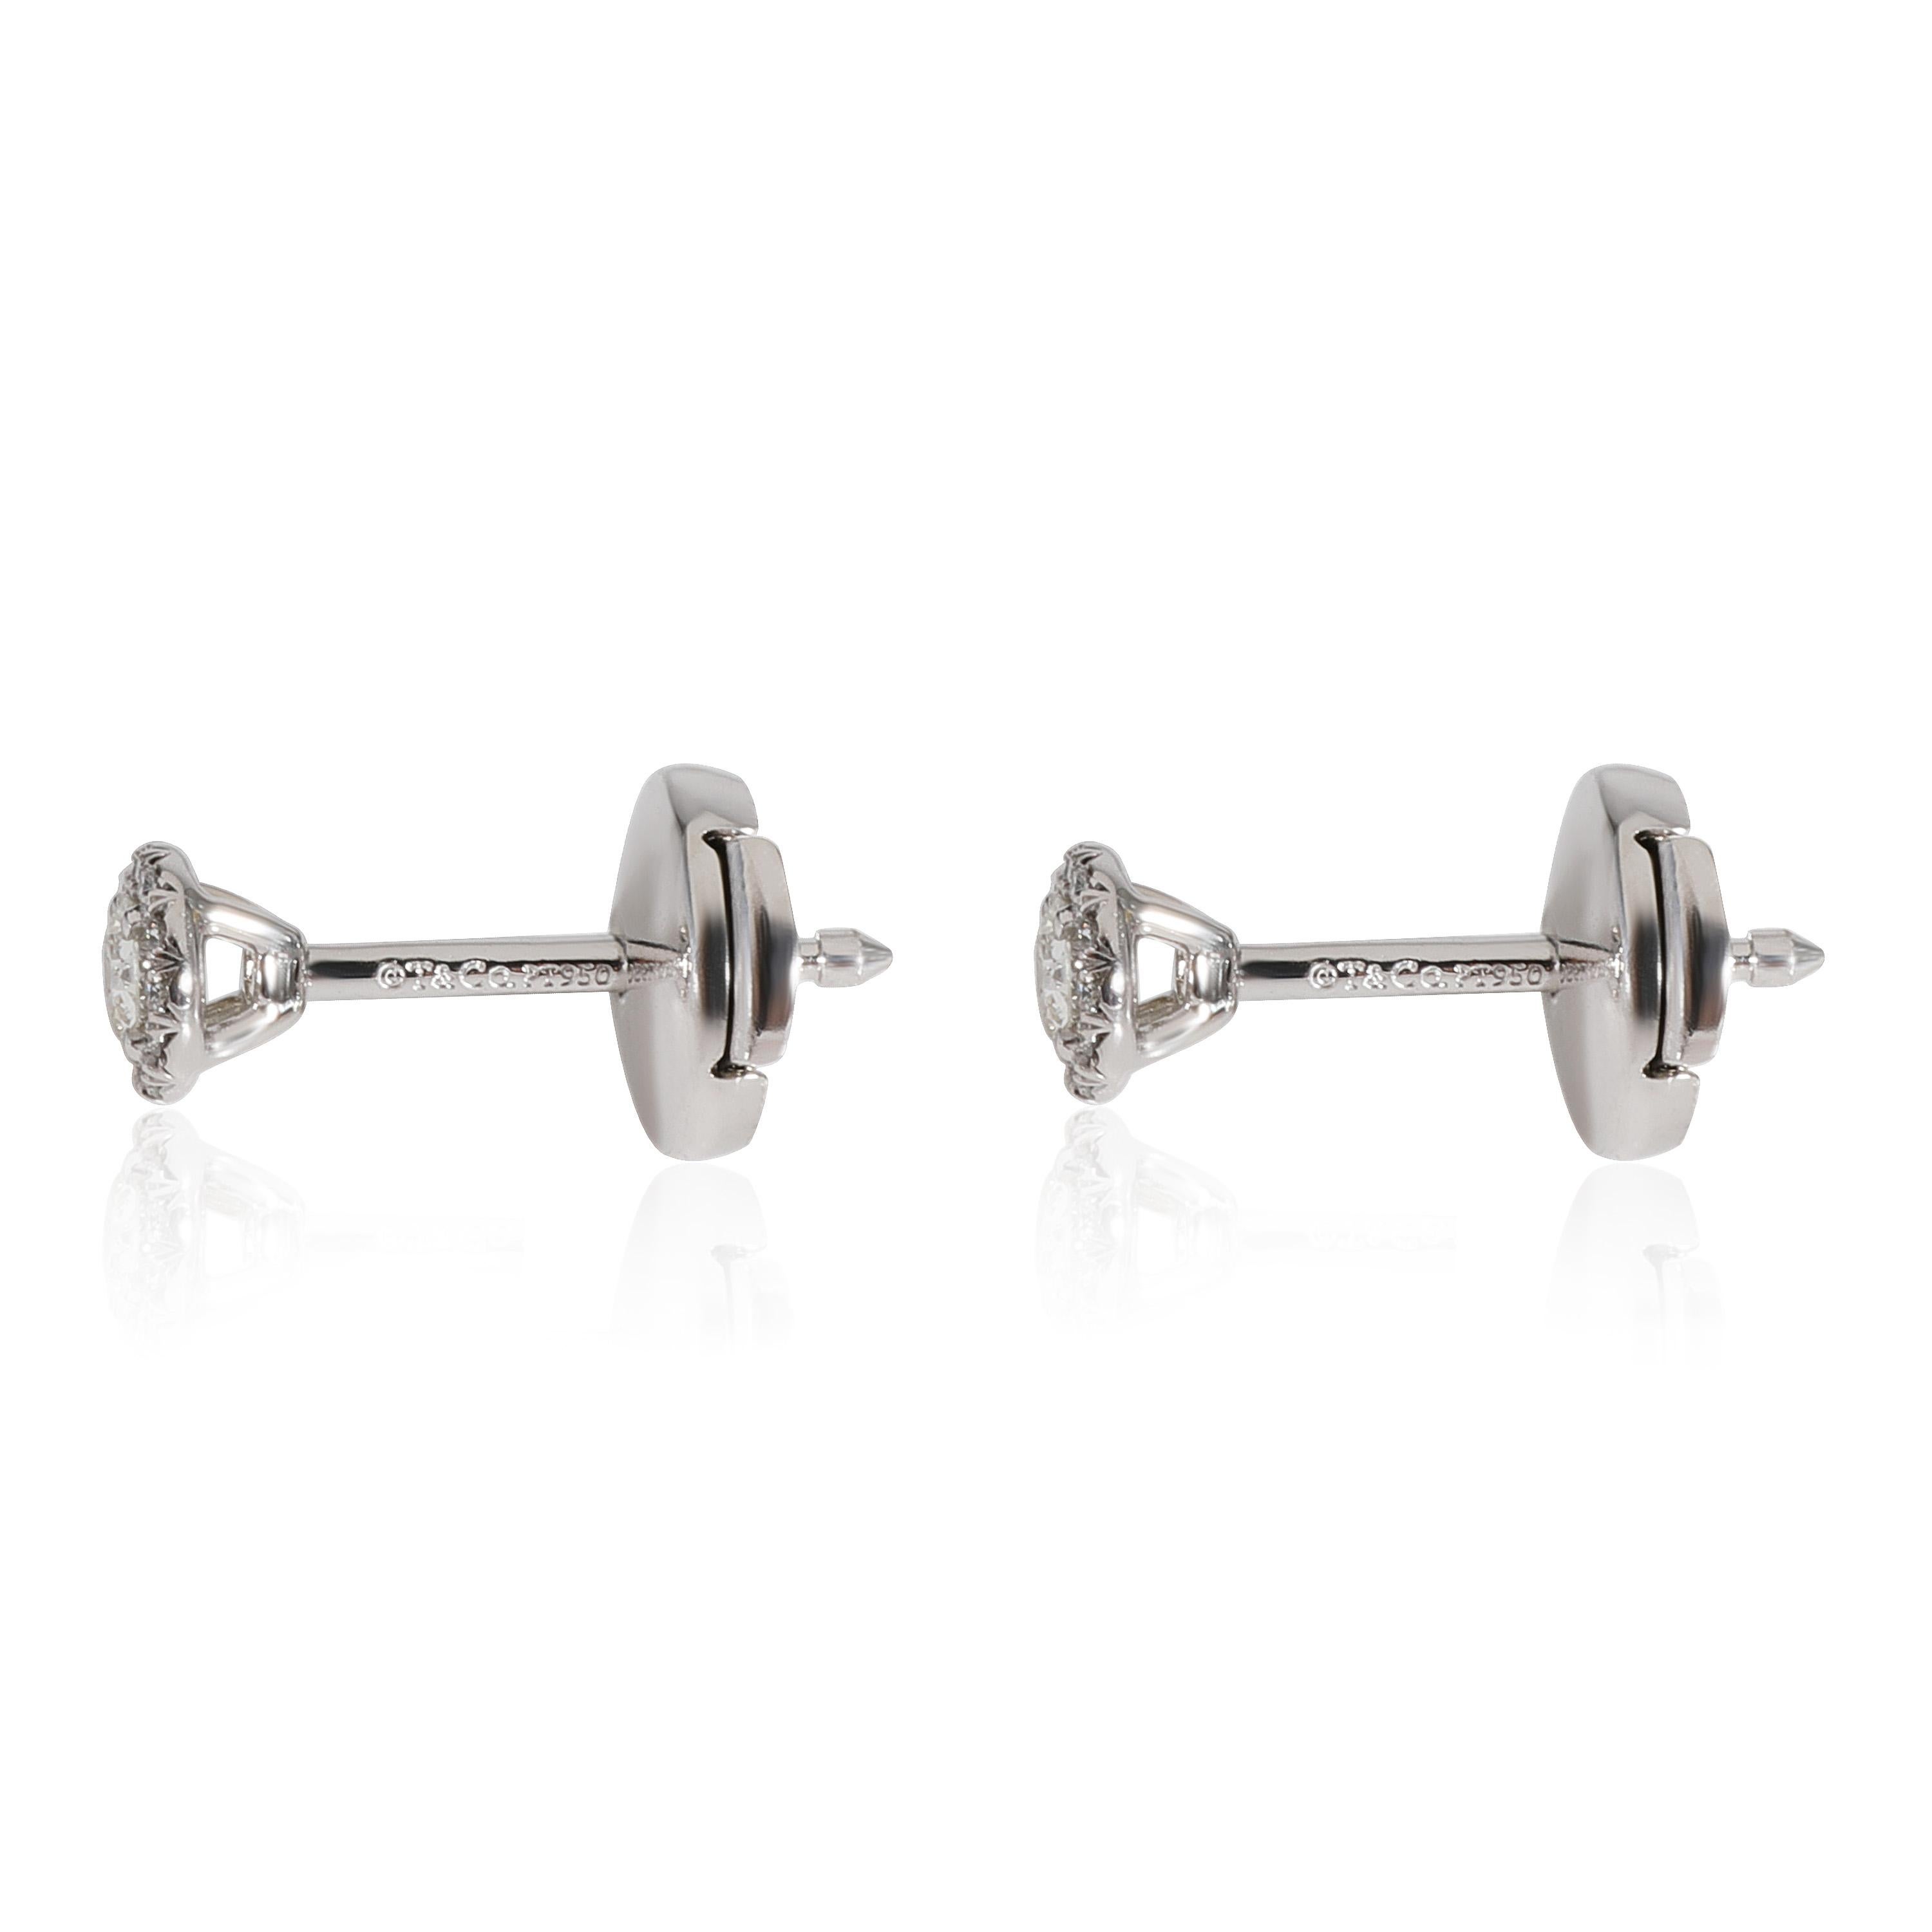 Tiffany & Co. Soleste Diamond Earrings in 950 Platinum 0.17 CTW

PRIMARY DETAILS
SKU: 122592
Listing Title: Tiffany & Co. Soleste Diamond Earrings in 950 Platinum 0.17 CTW
Condition Description: Retails for 2600 USD. In excellent condition and